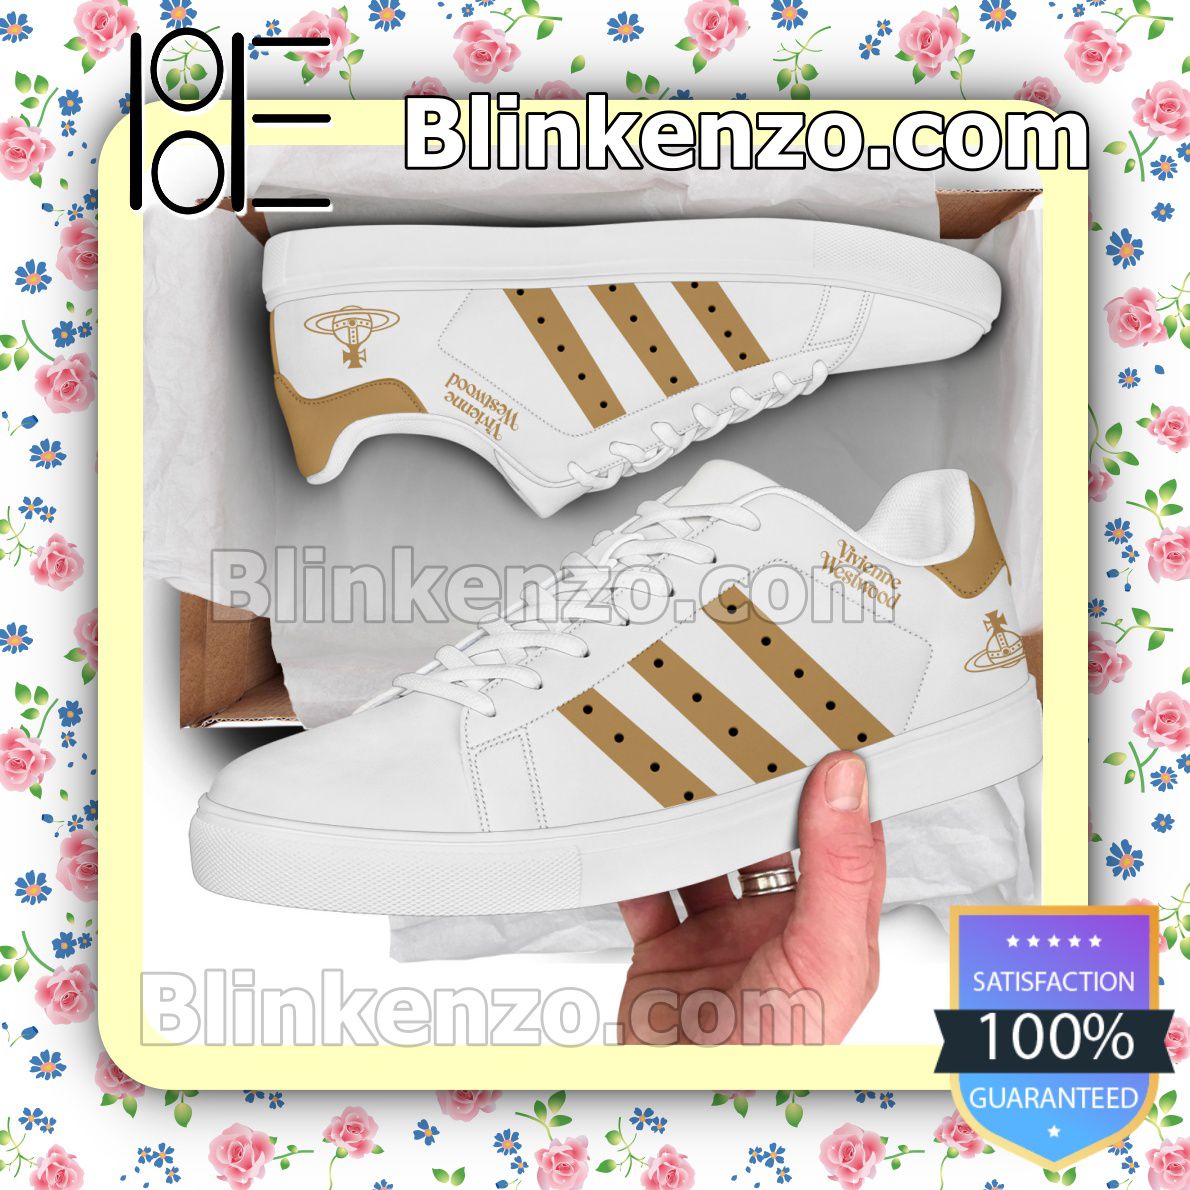 Vivienne Westwood Company Brand Adidas Low Top Shoes